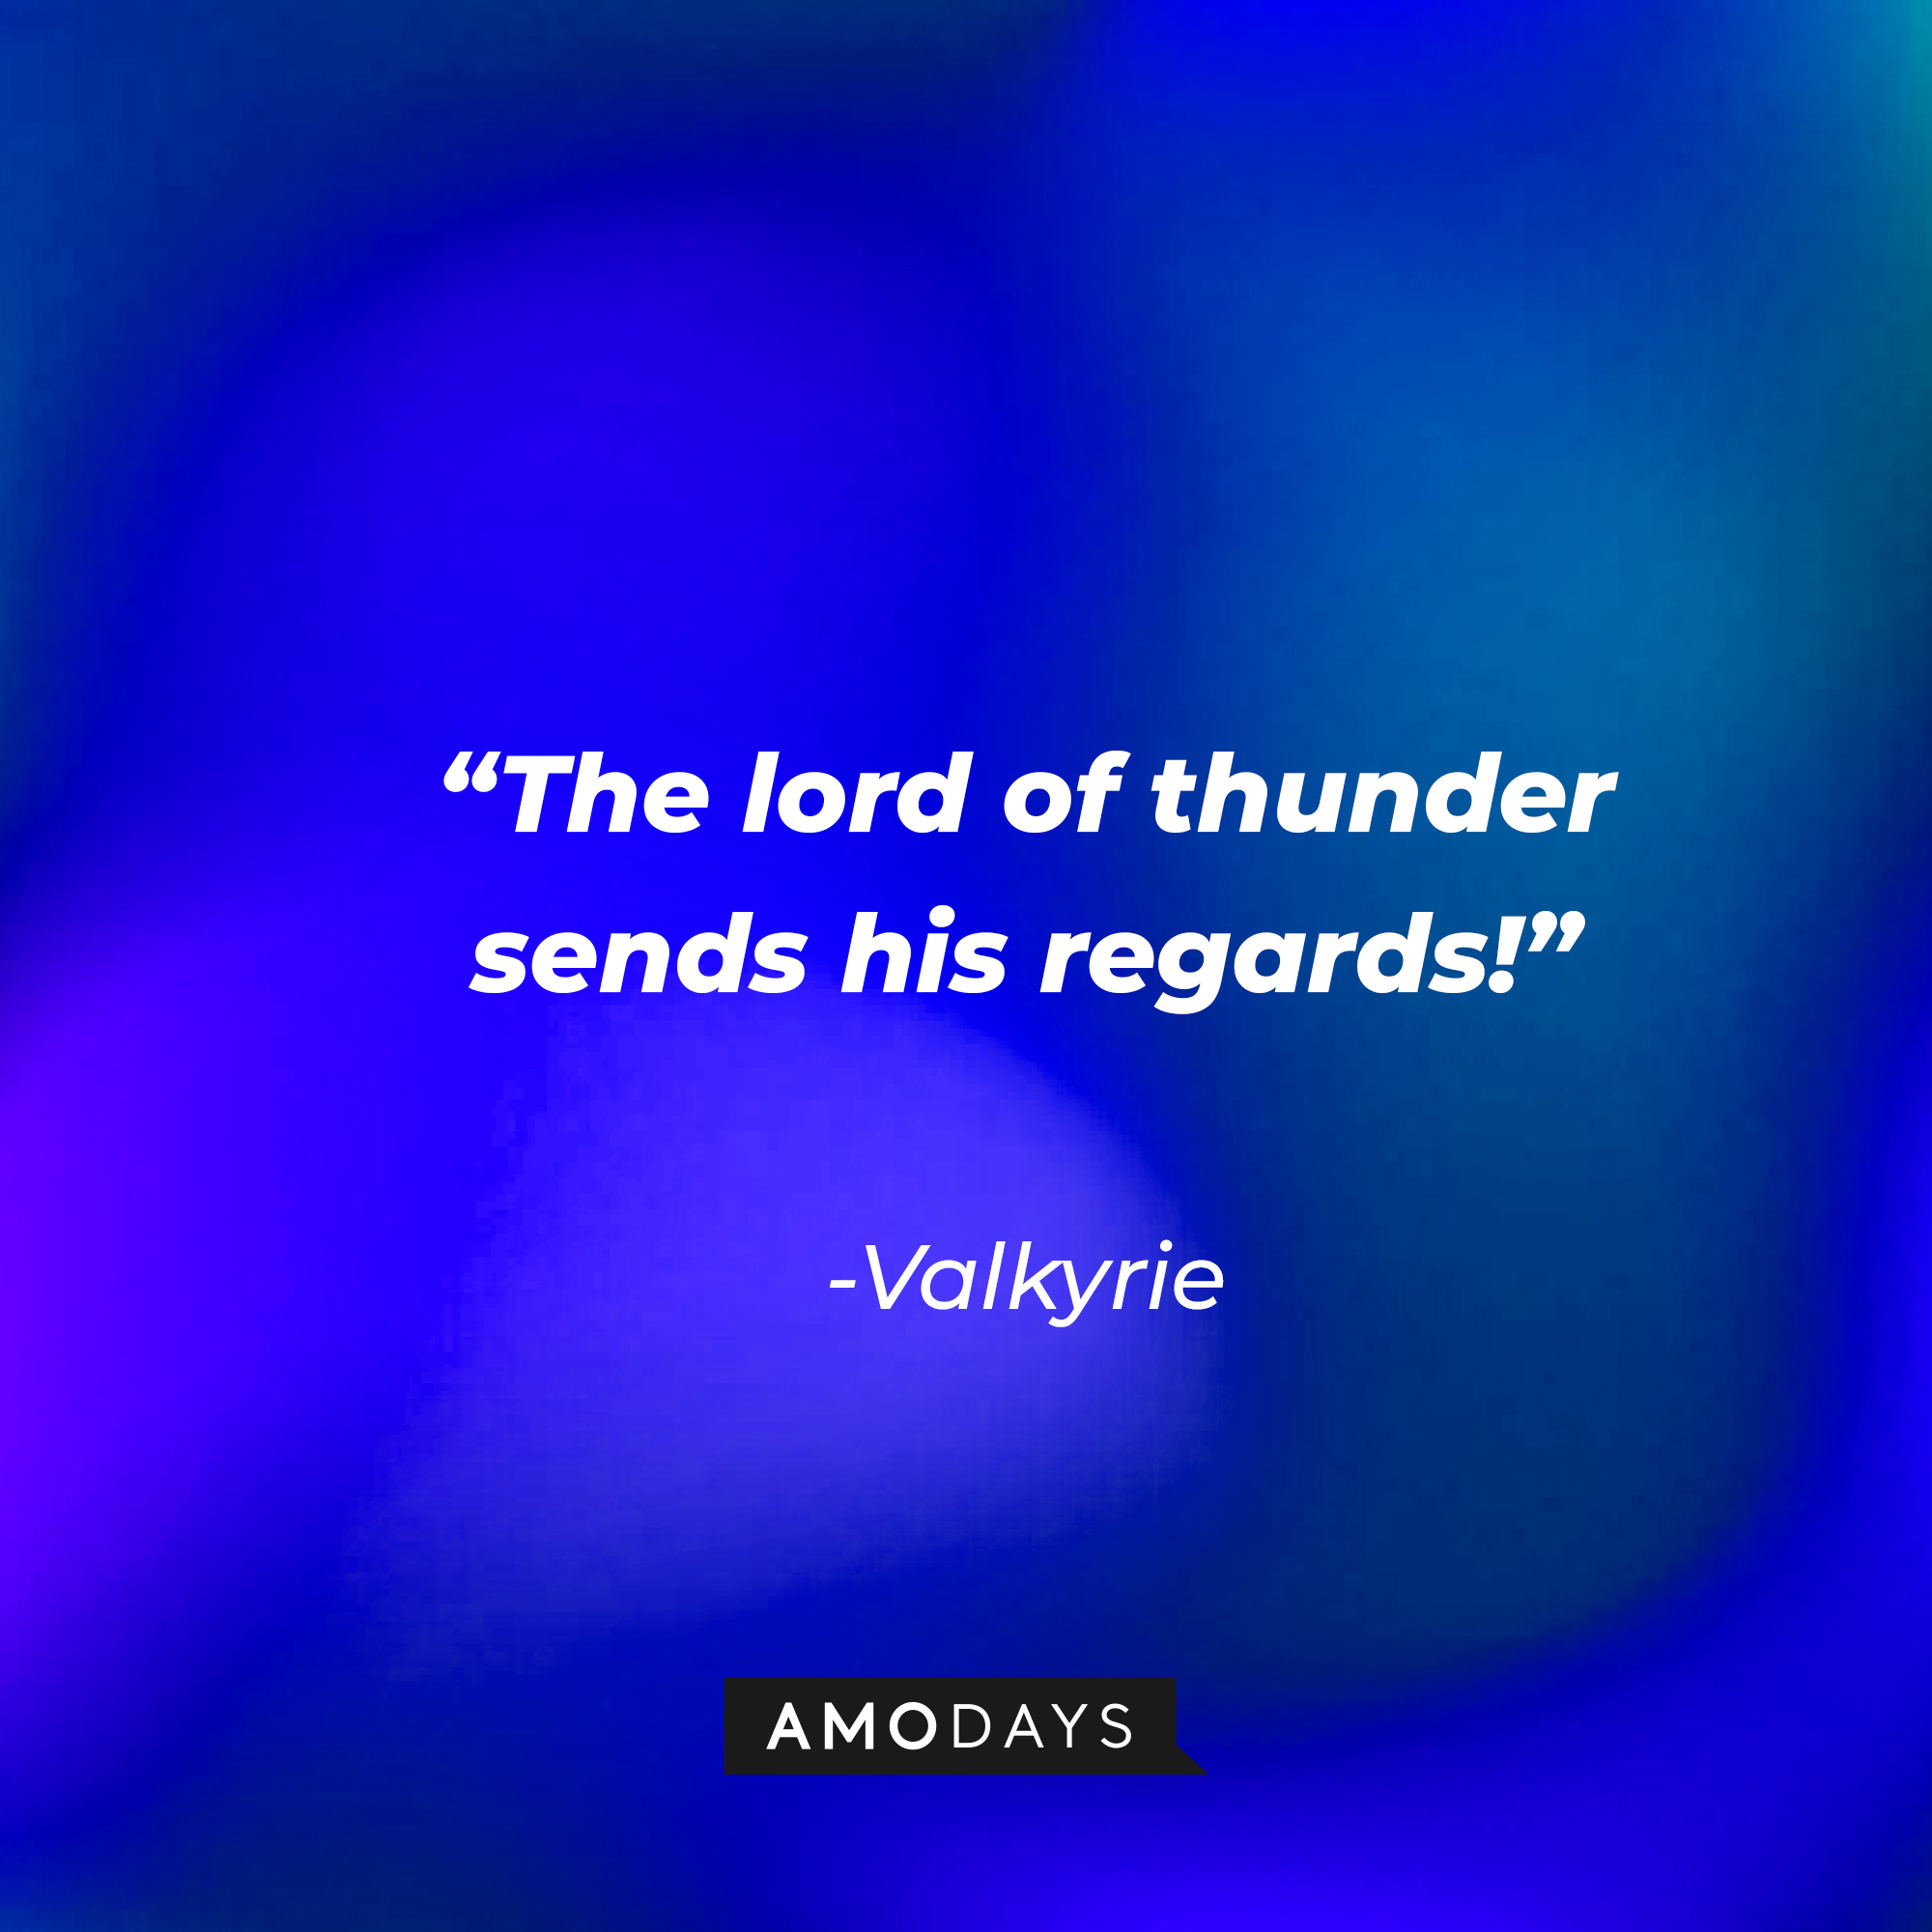 Valkyrie's quote: “The lord of thunder sends his regards!” | Source: Amodays